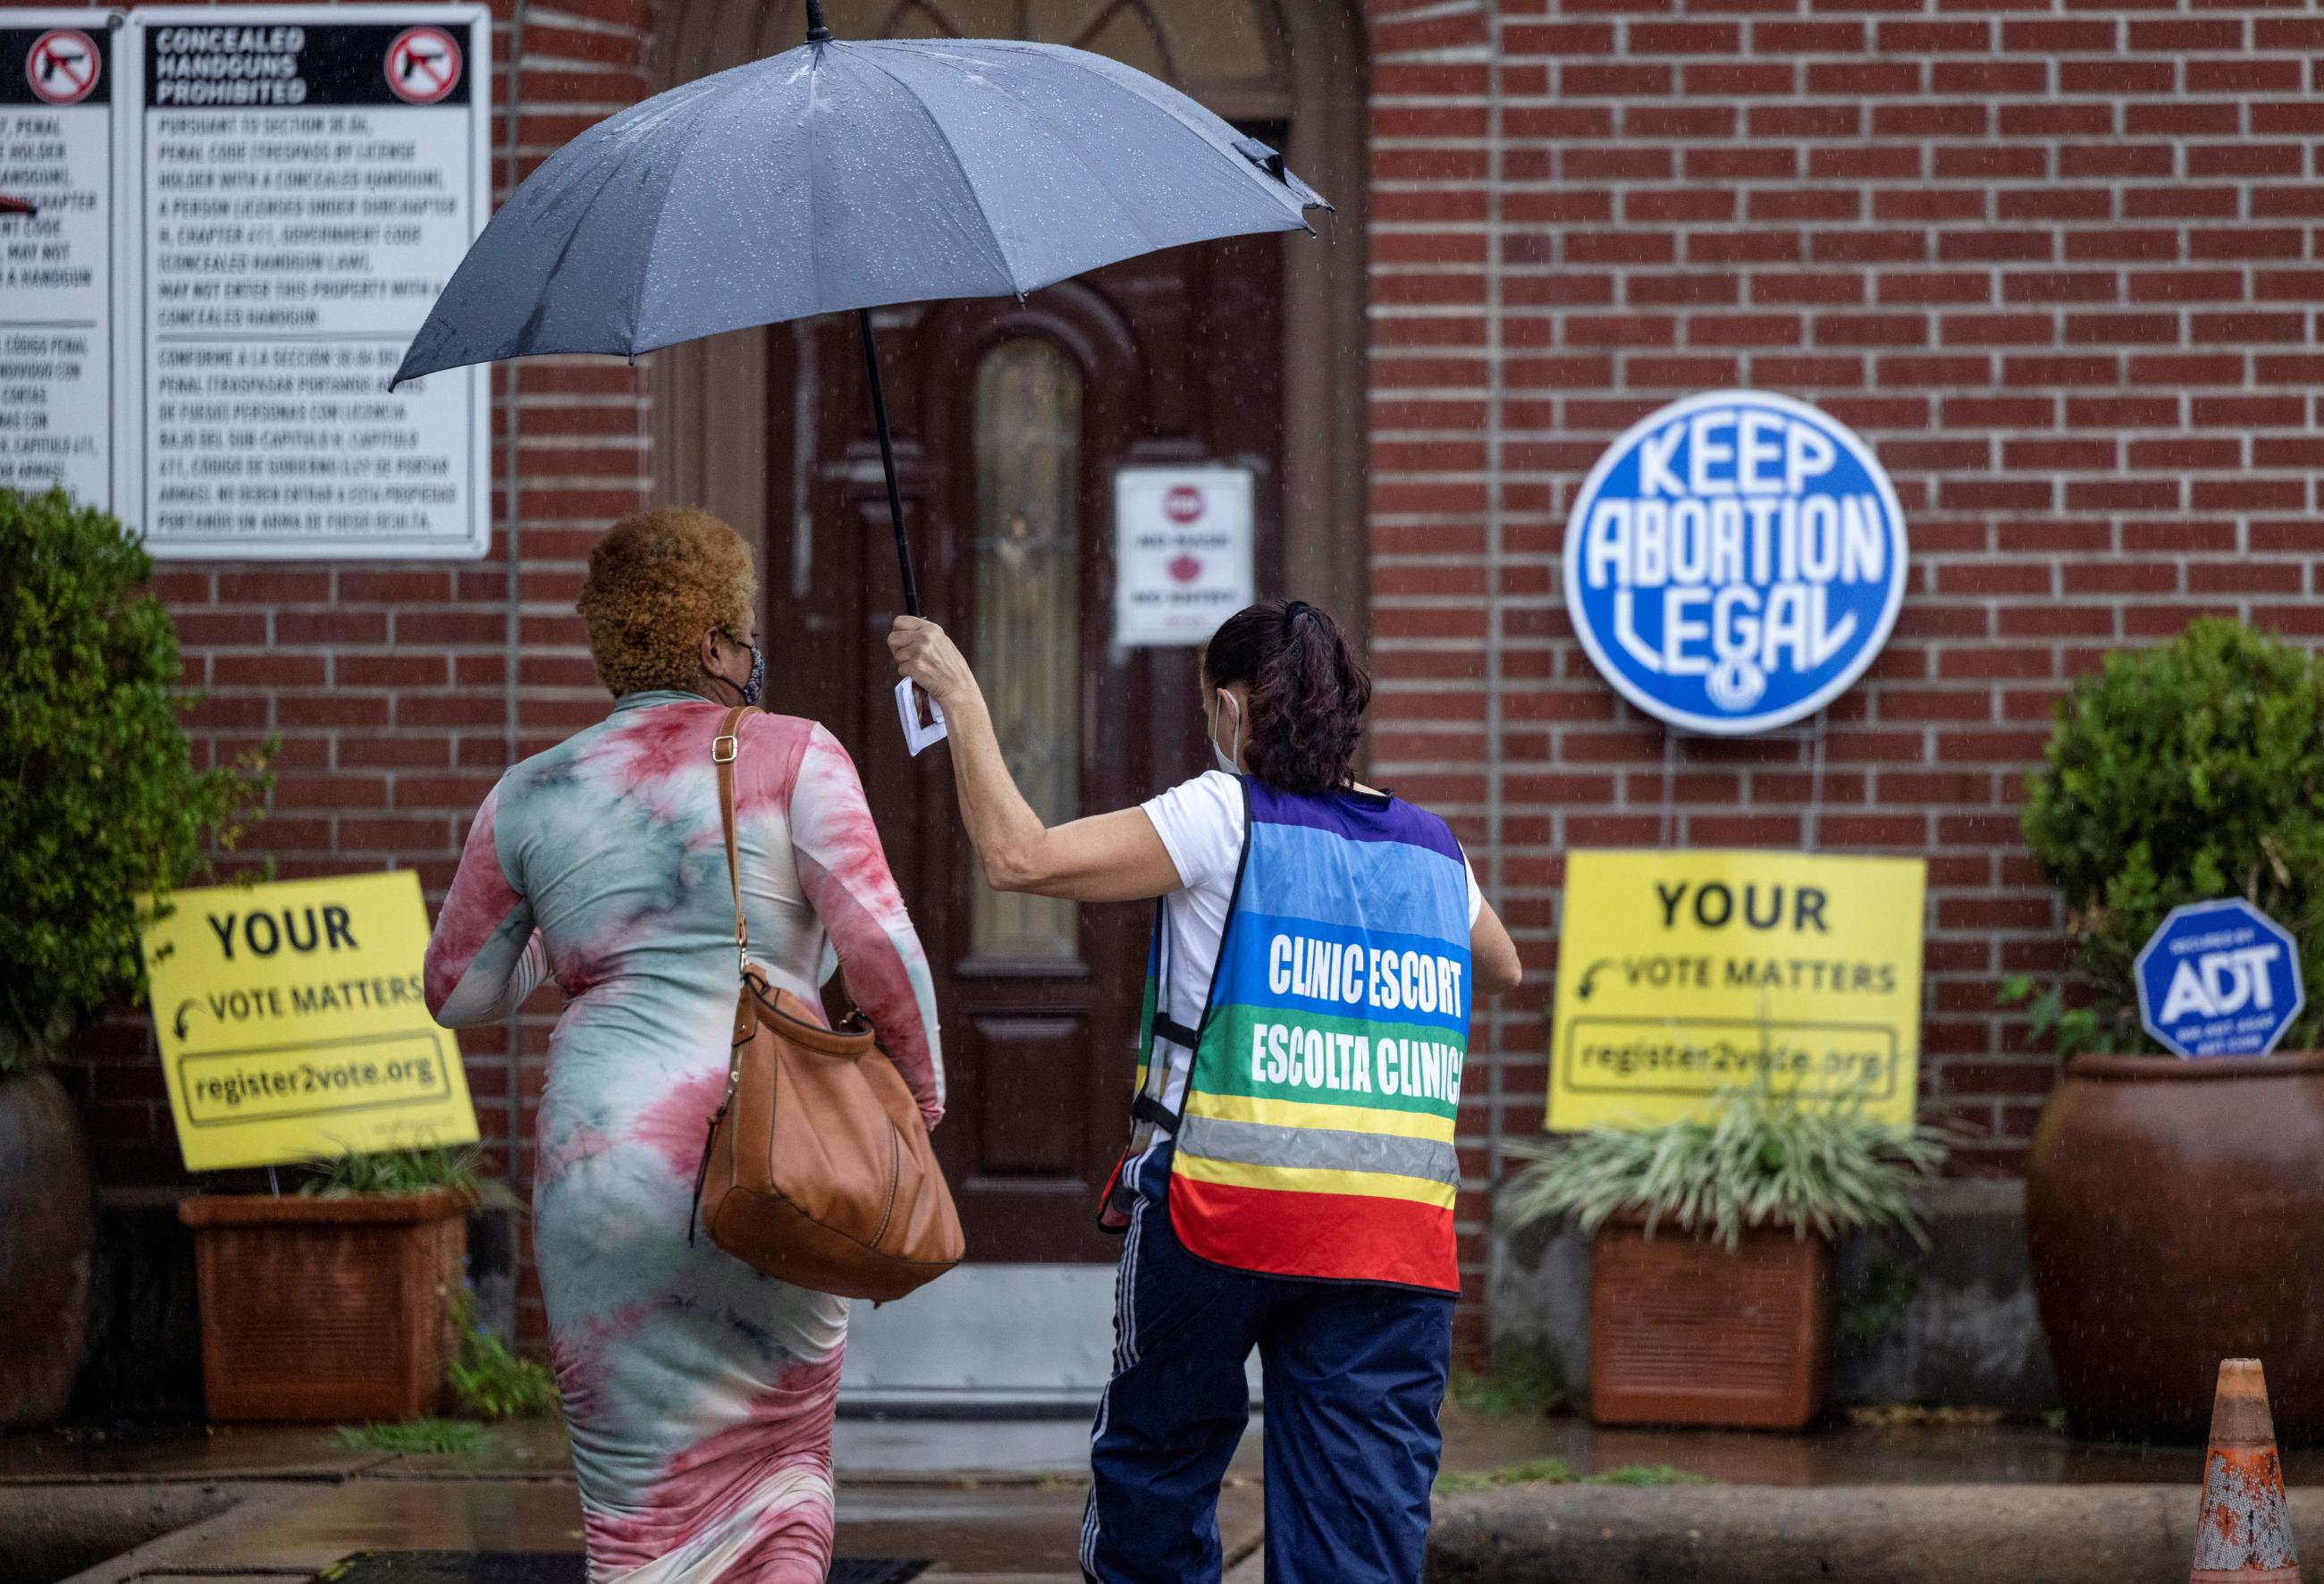 A clinic escort in a rainbow vest labeled in English and Spanish holds a black umbrella for a woman in a nice dress holding a handbag as they walk inside a red brick clinic. Outside the clinic is a blue plaque that says "Keep abortion legal" and yellow signs instructing people how to vote